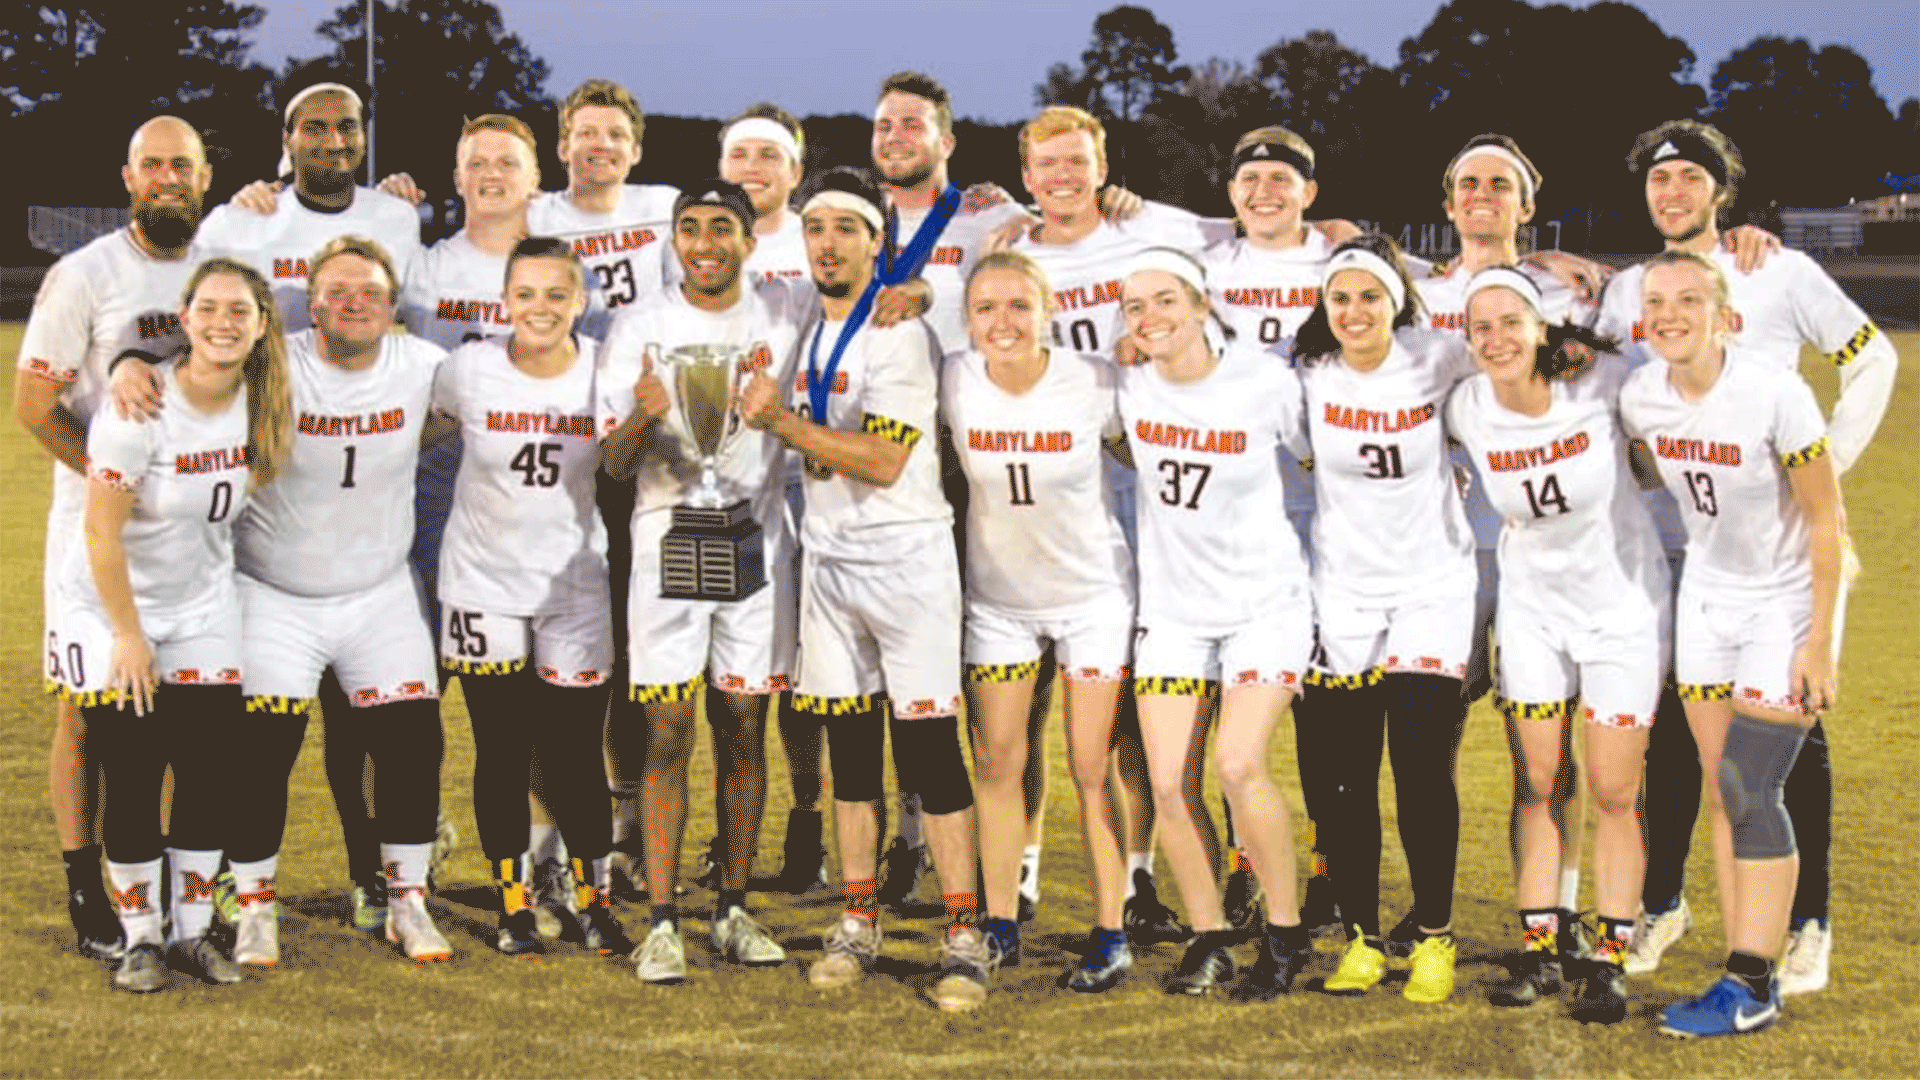 Pixelated GIF of Maryland Quidditch team holding a trophy